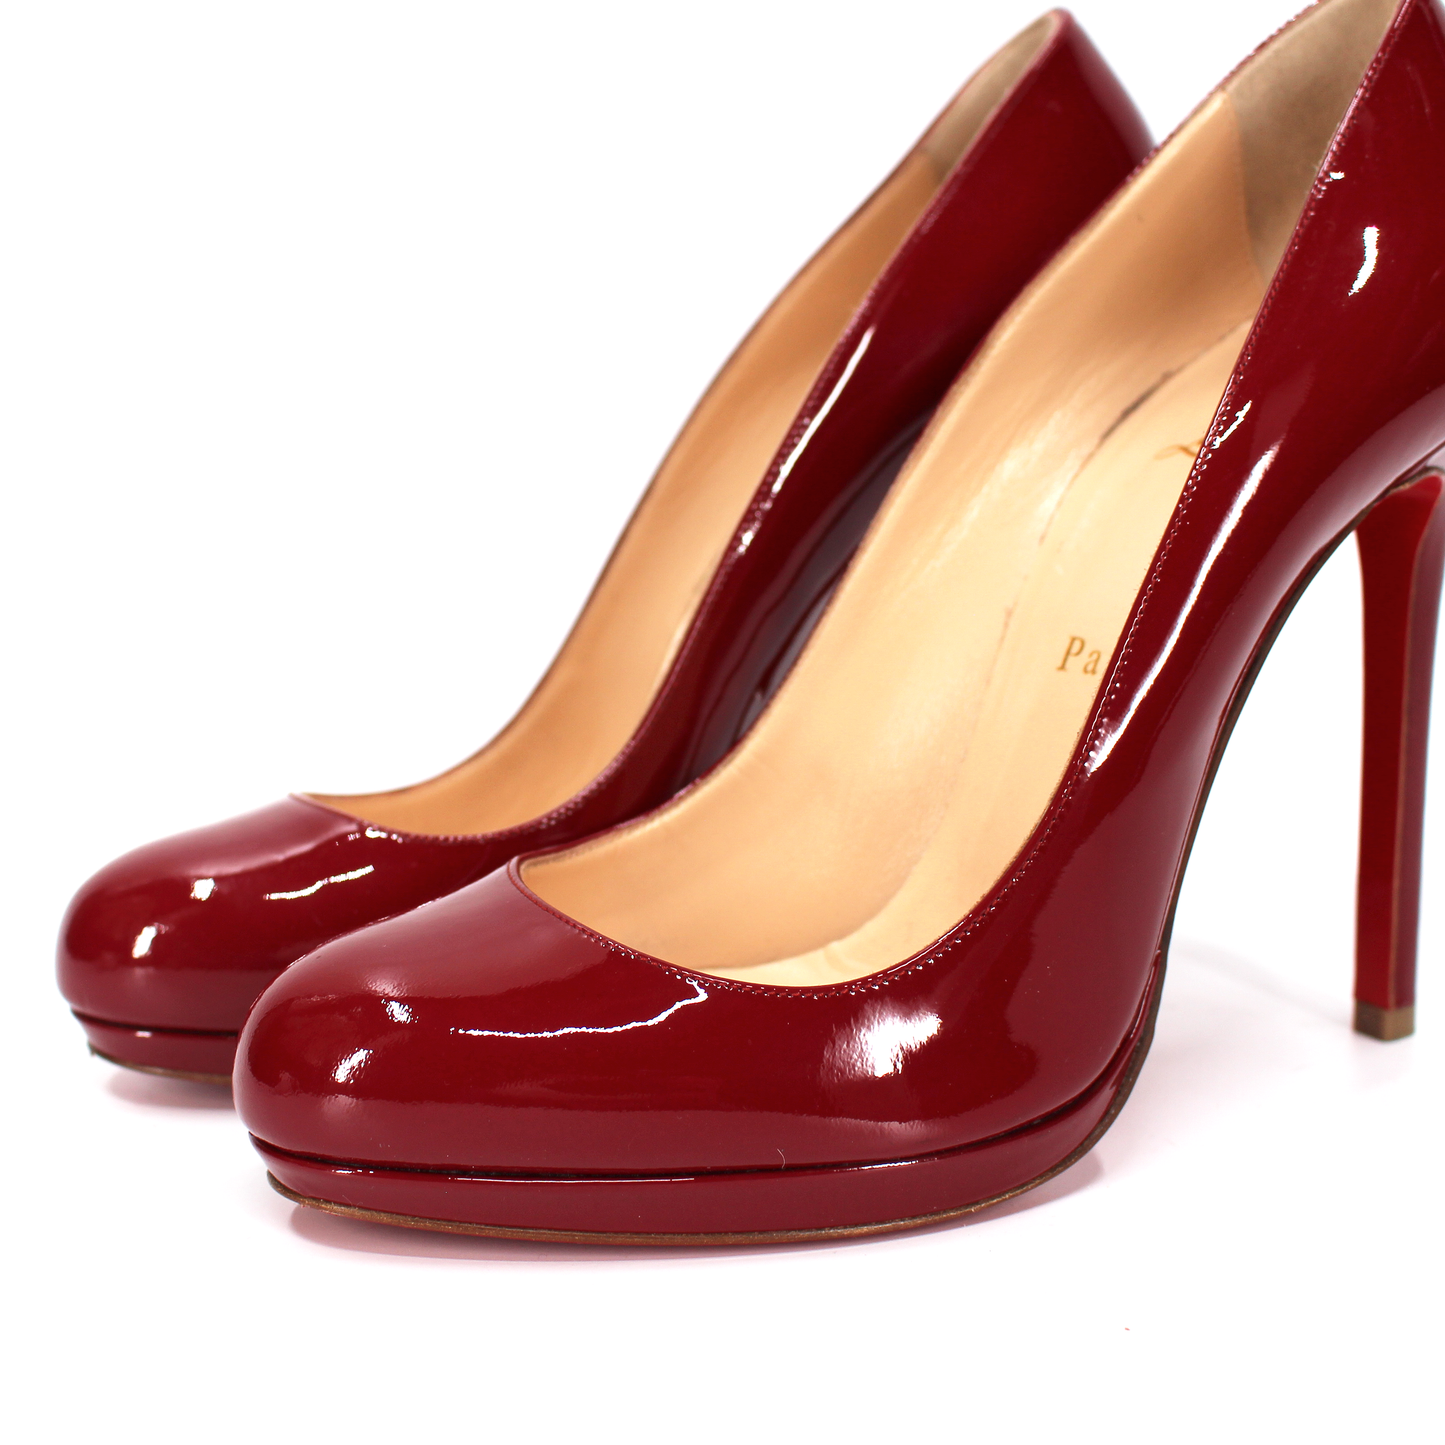 Christian Louboutin Patent Leather Heels